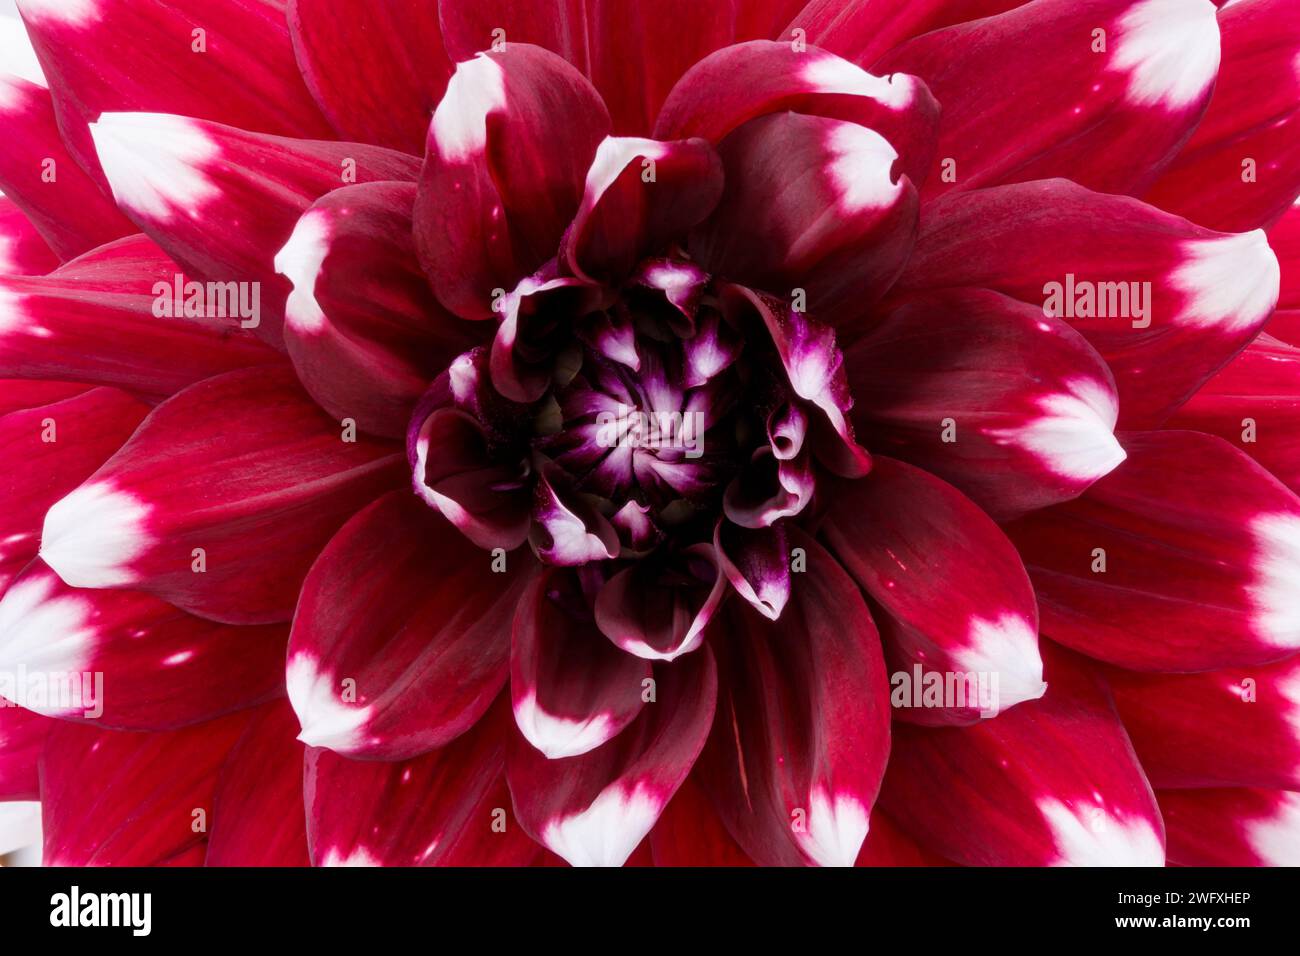 Dahlia Flower. Canfield Fair. Mahoning County Fair. Canfield, Youngstown, Ohio, USA. Stock Photo